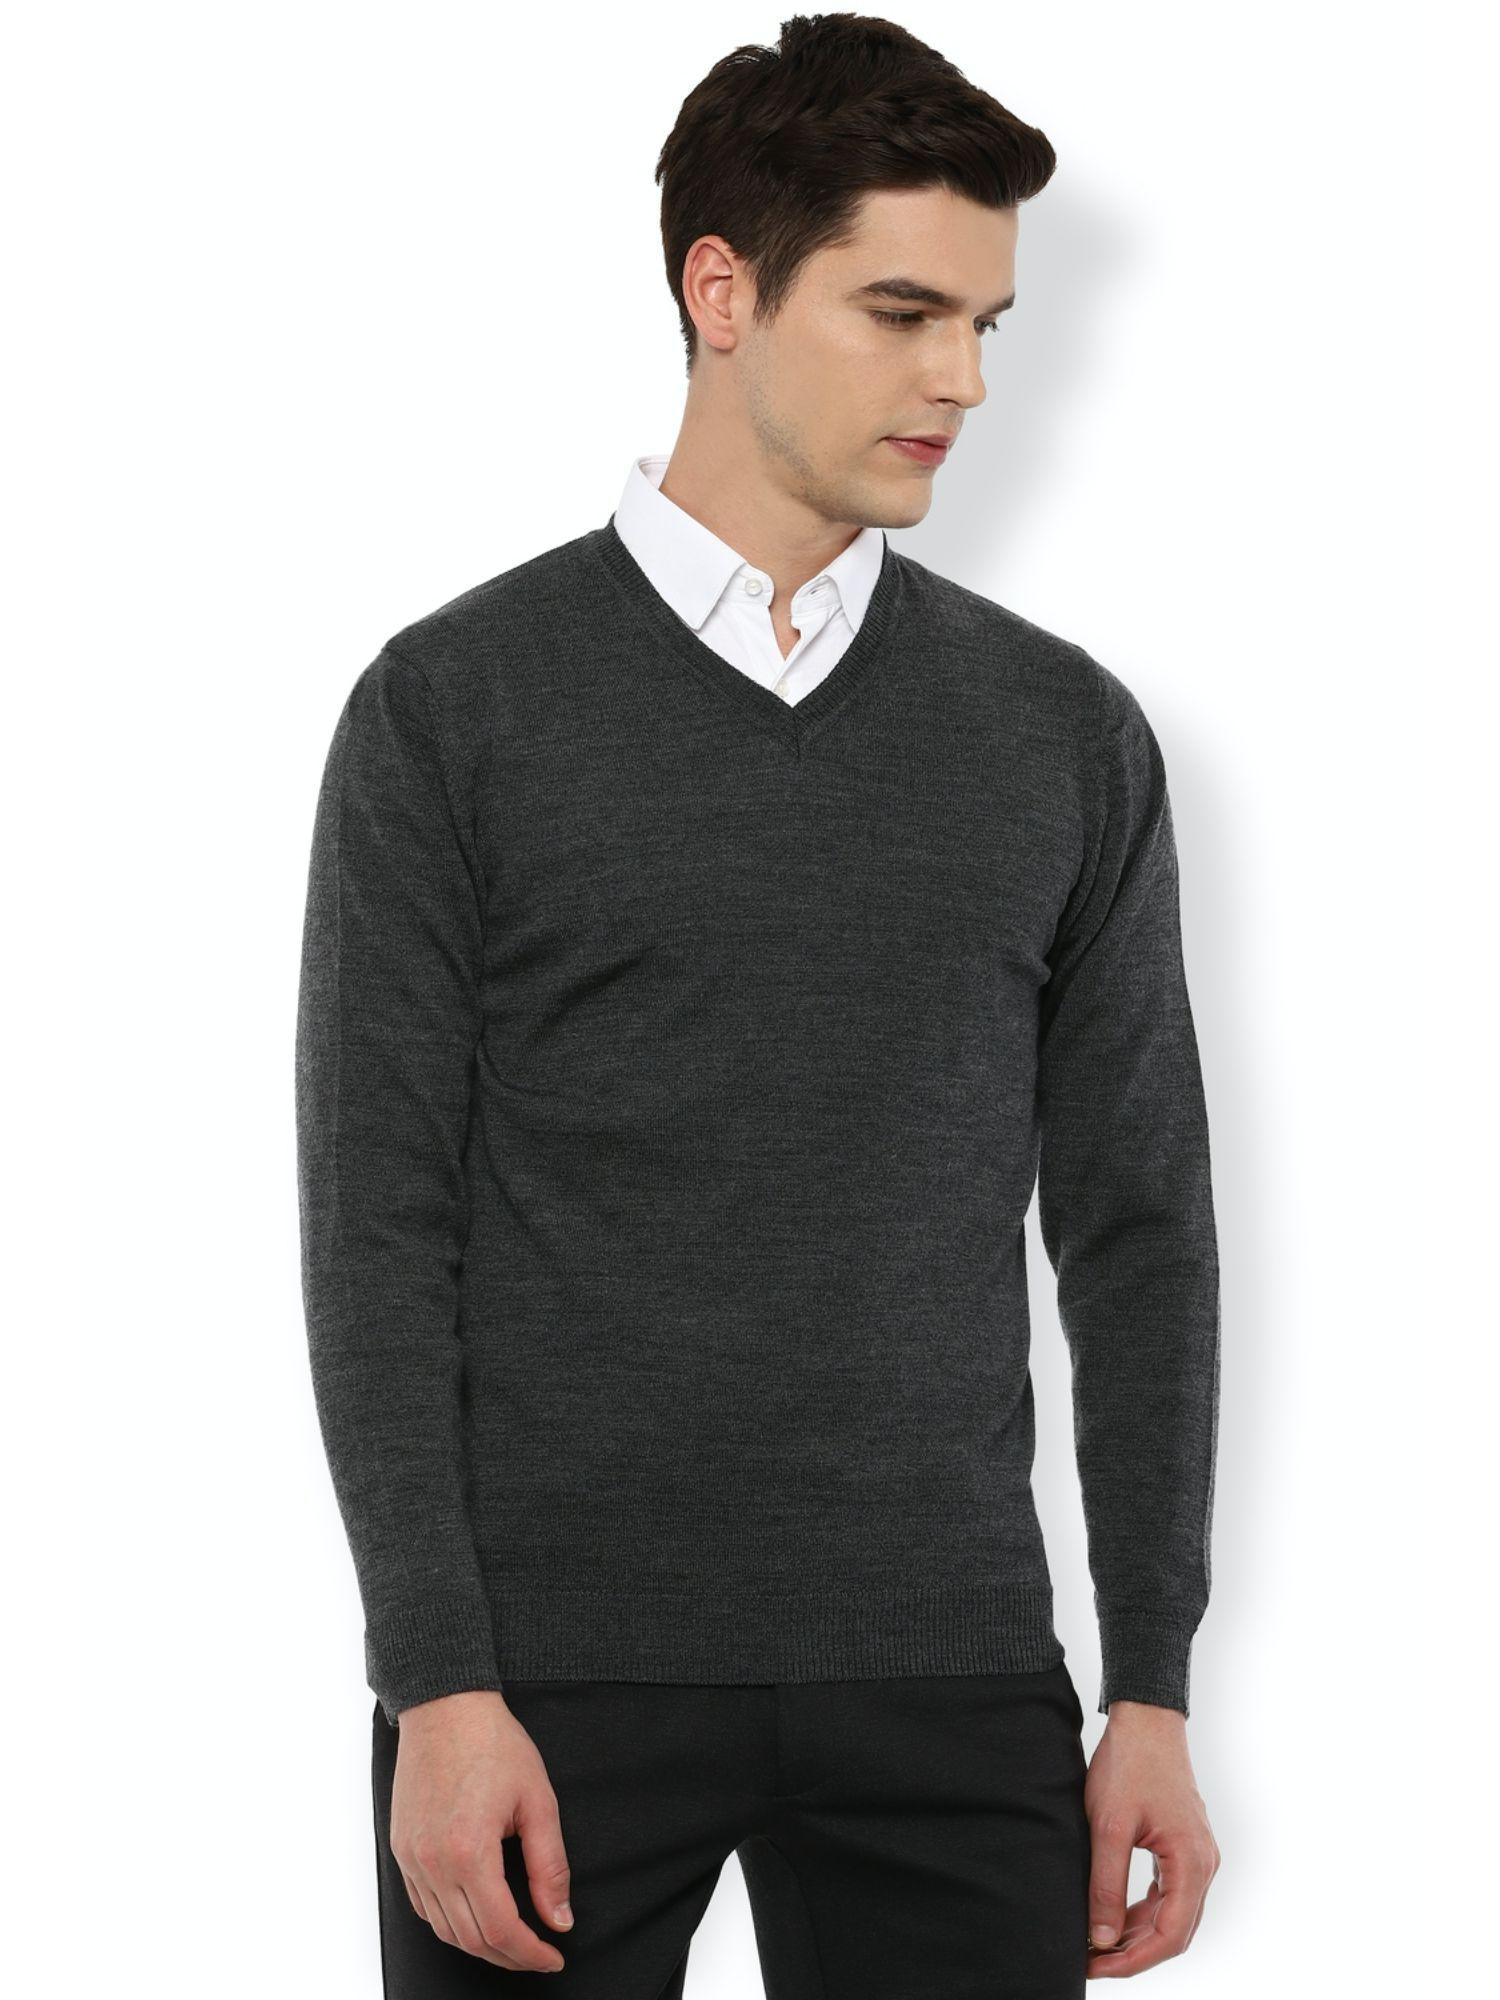 mens-solid-grey-sweater